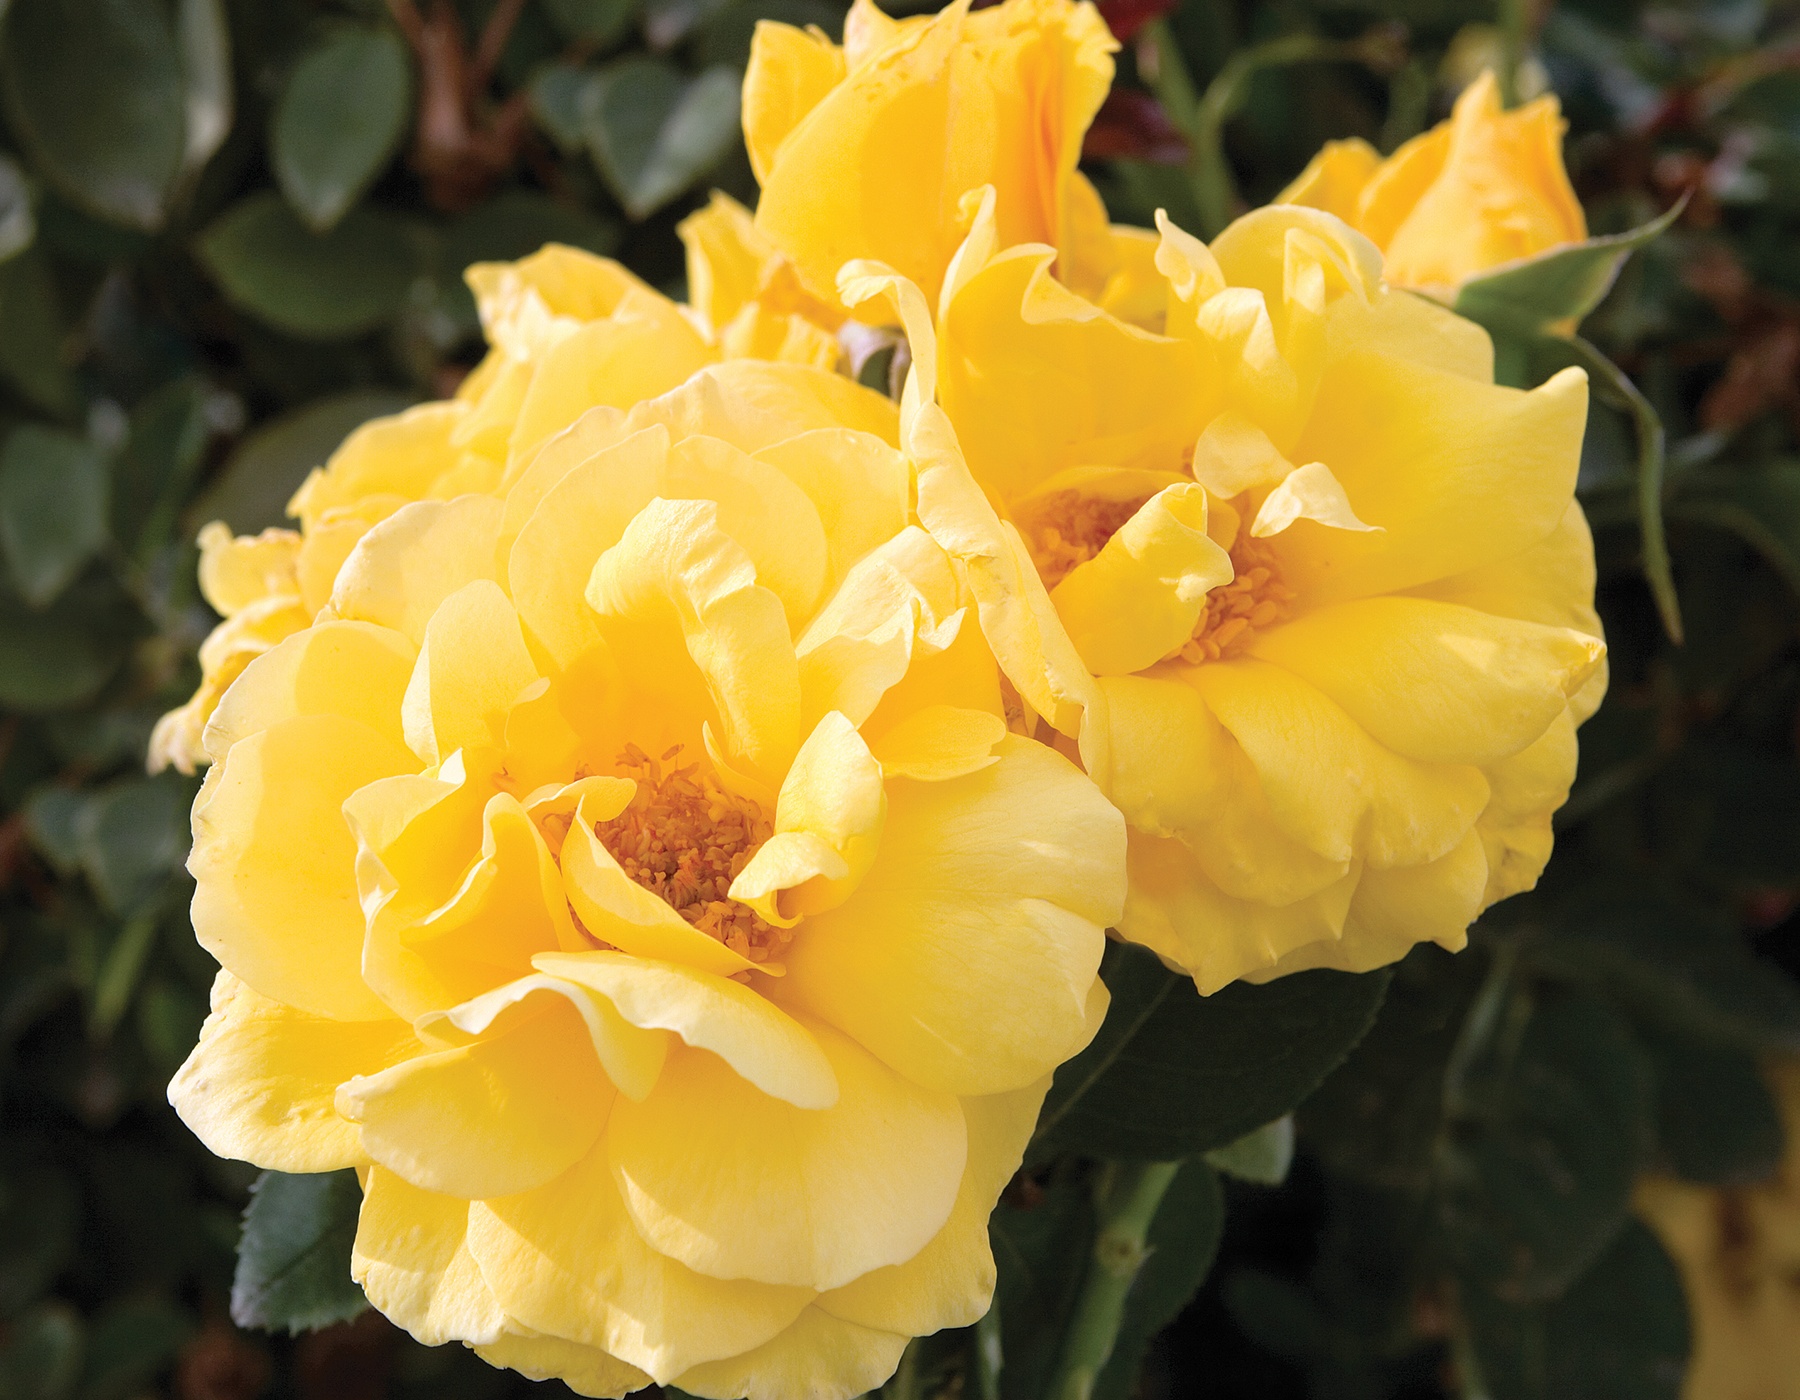 Midas Touch™ - Star® Roses and Plants